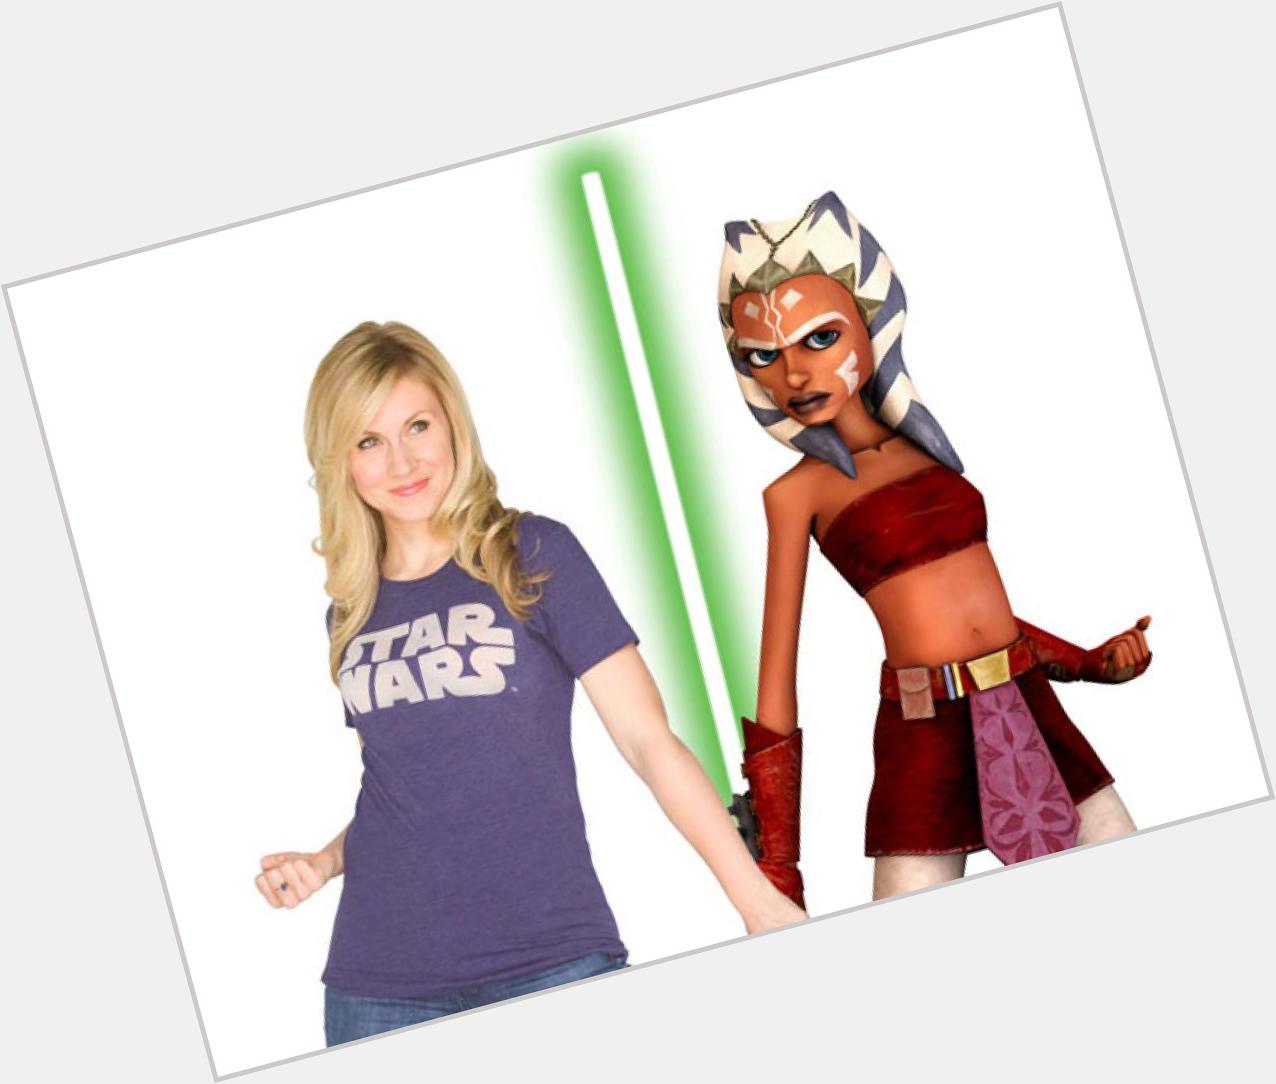 Happy Birthday to the one & only Ashley Eckstein How fitting your BDay falls on this year! 